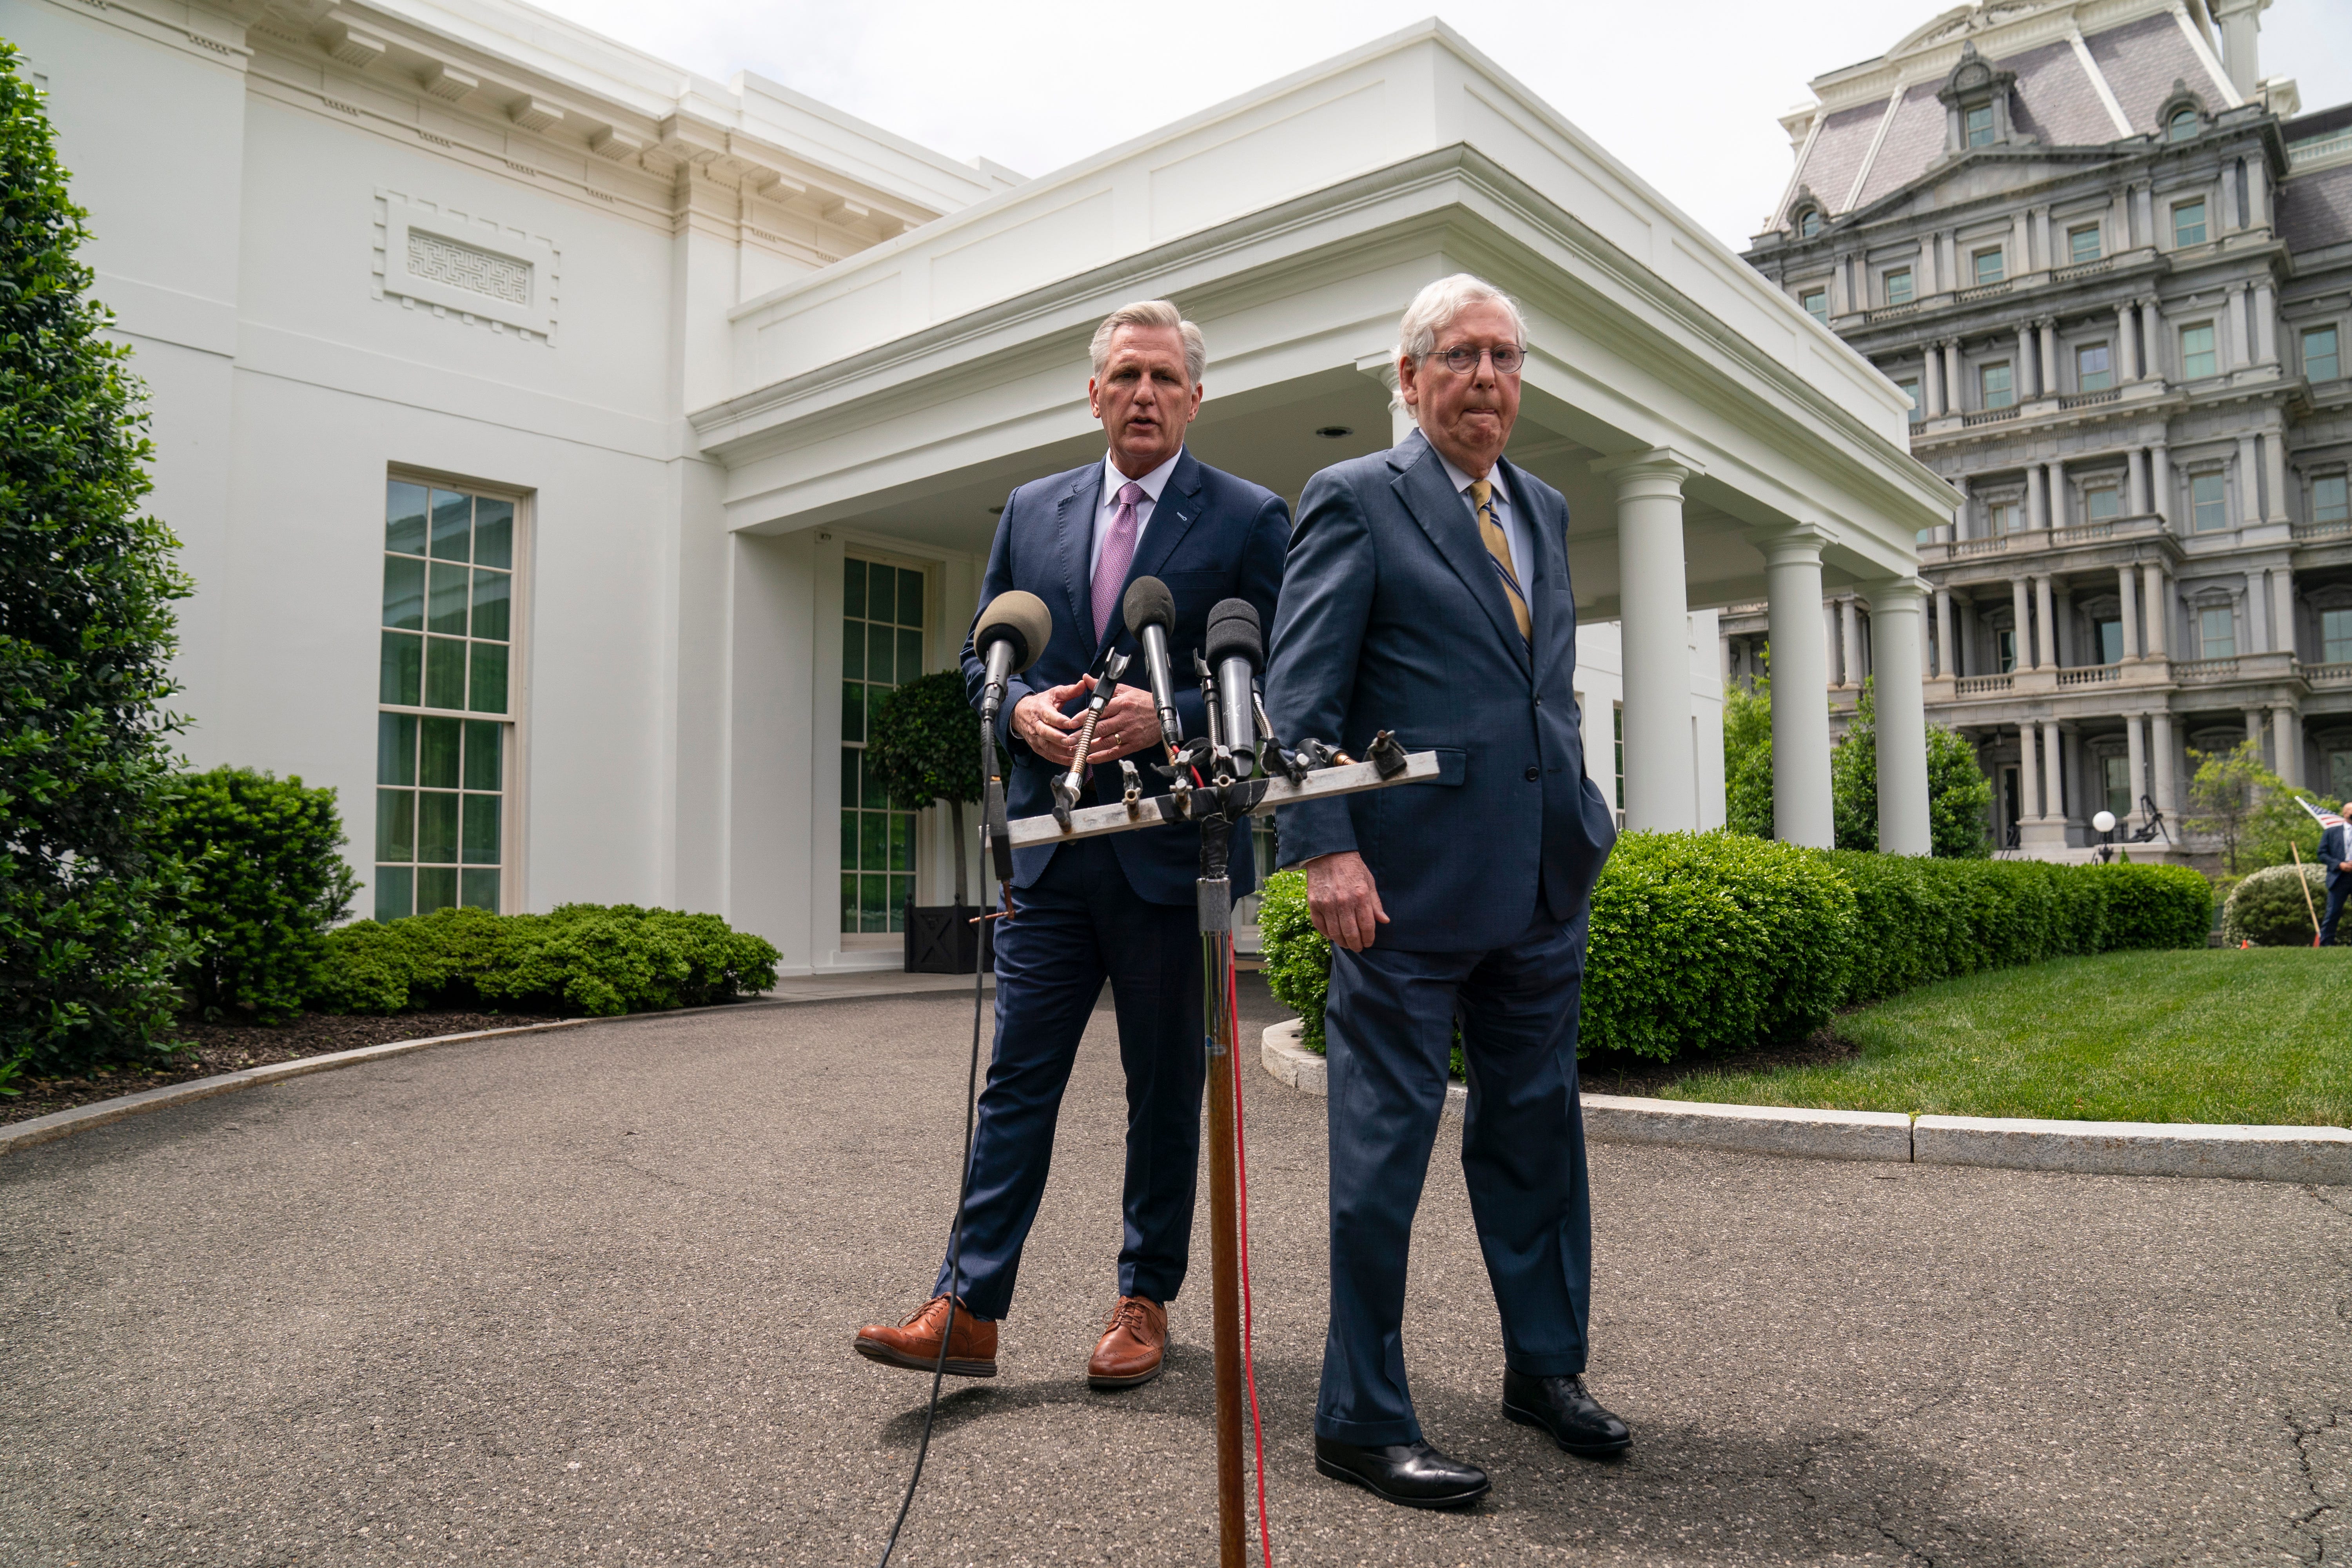 House Minority Leader Kevin McCarthy, R-Calif., left, and Senate Minority Leader Mitch McConnell, R-Ky., head opposition to President Joe Biden's big spending plans.